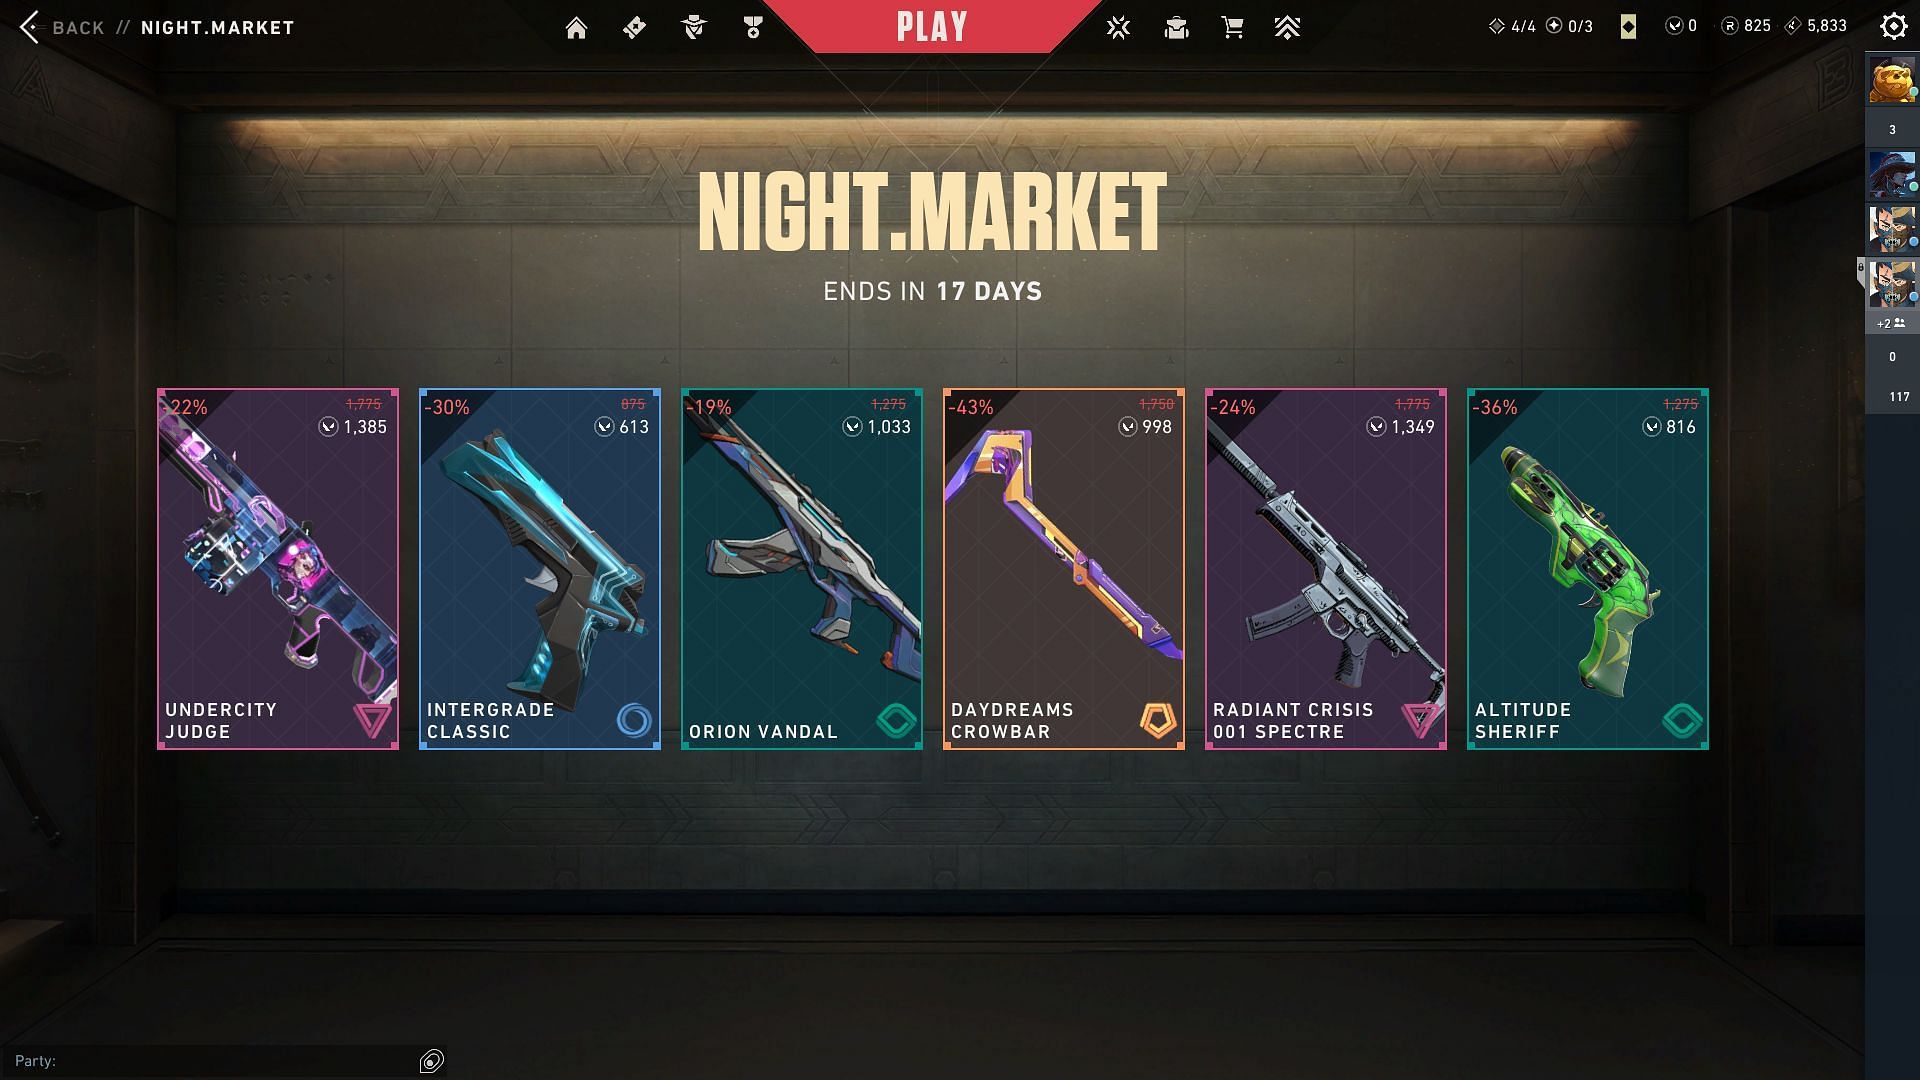 The Market is currently live on servers (Image via Riot Games)